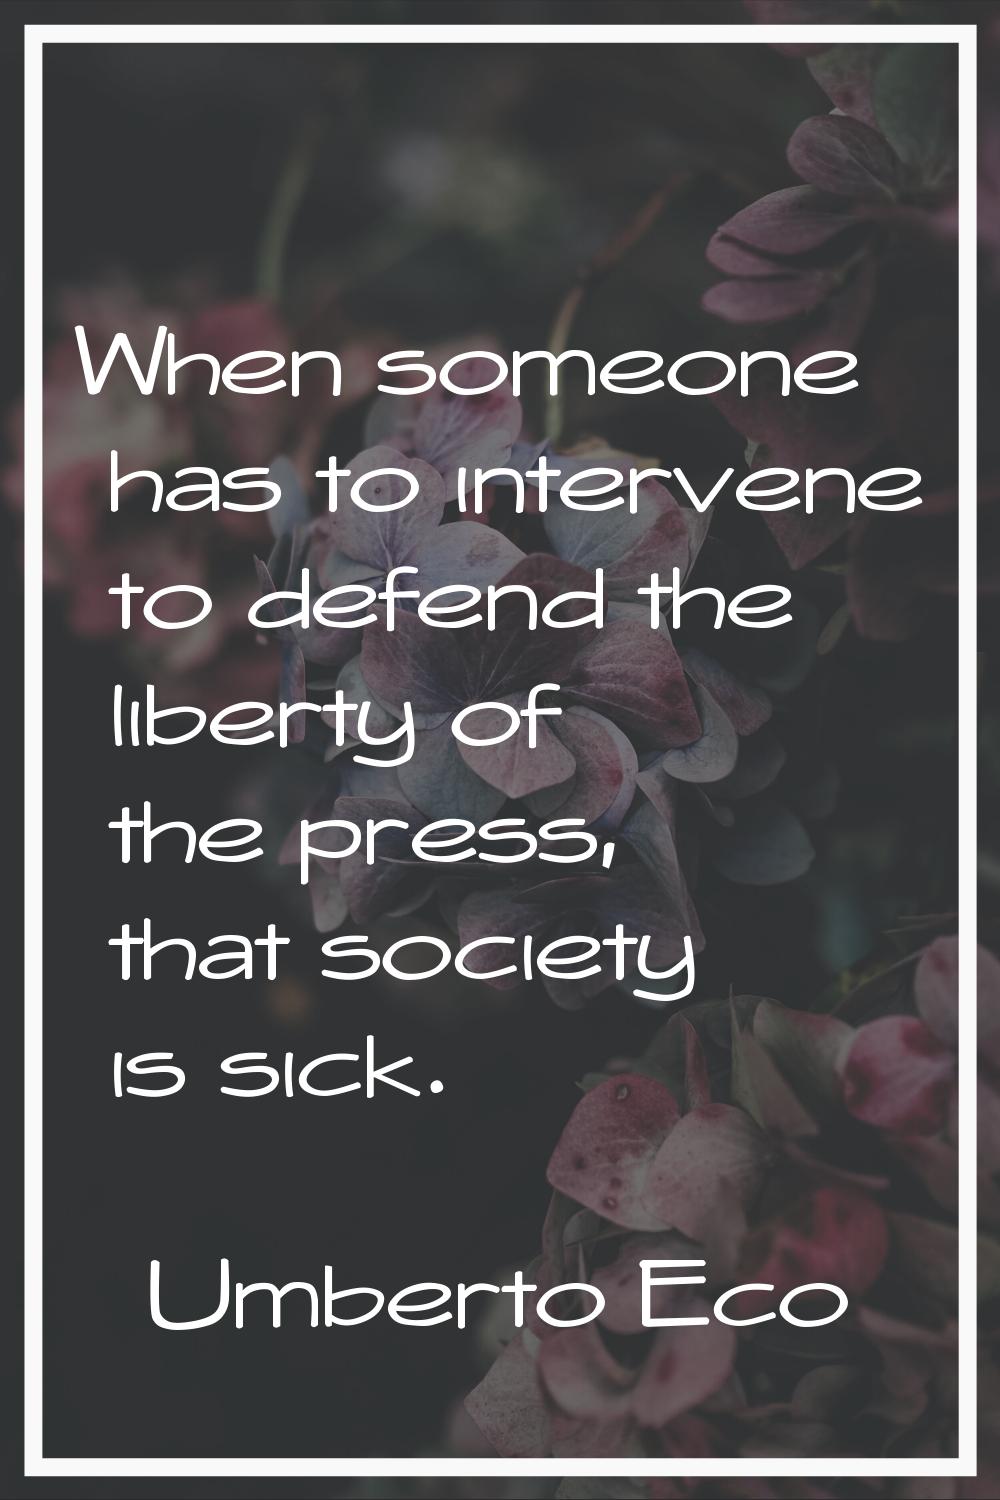 When someone has to intervene to defend the liberty of the press, that society is sick.